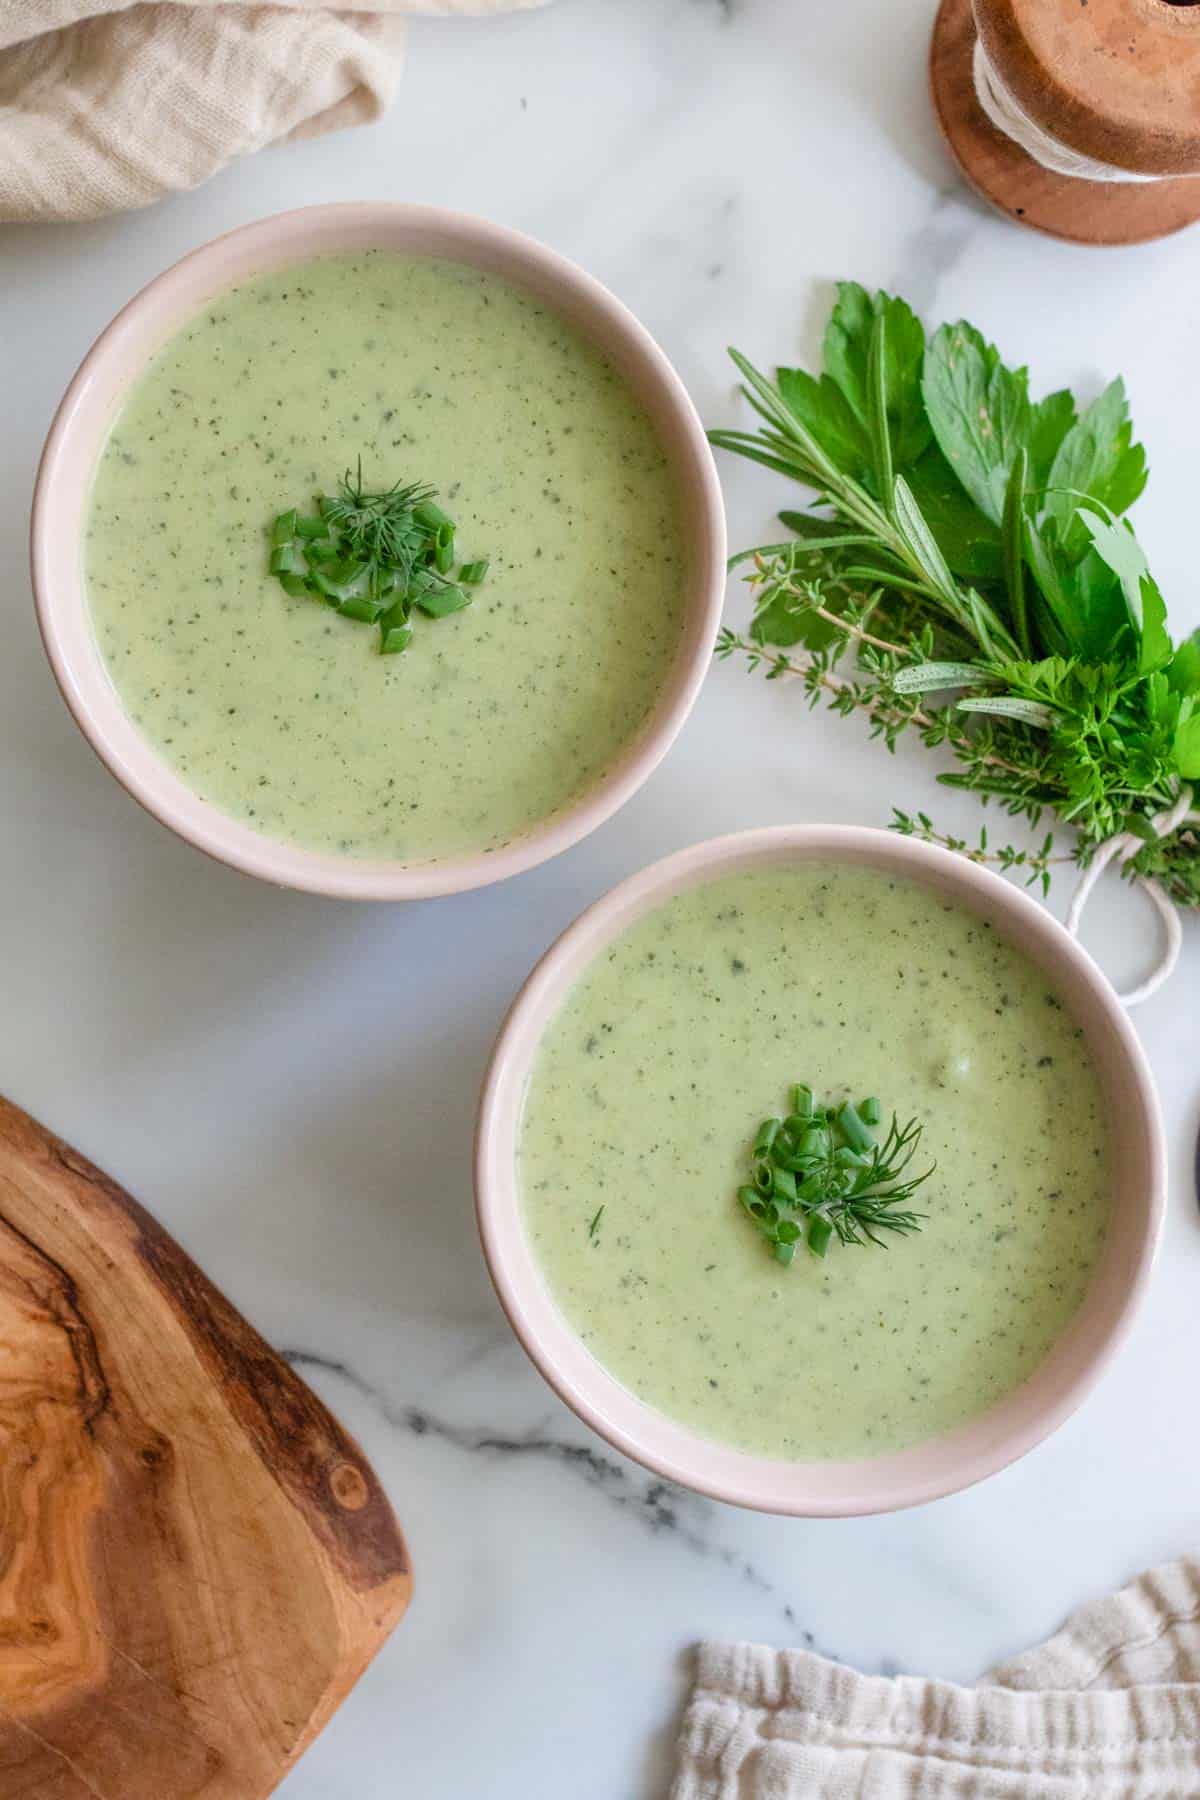 Two pink bowls filled with creamy green soup next to a bunch of fresh parsley and rosemary.